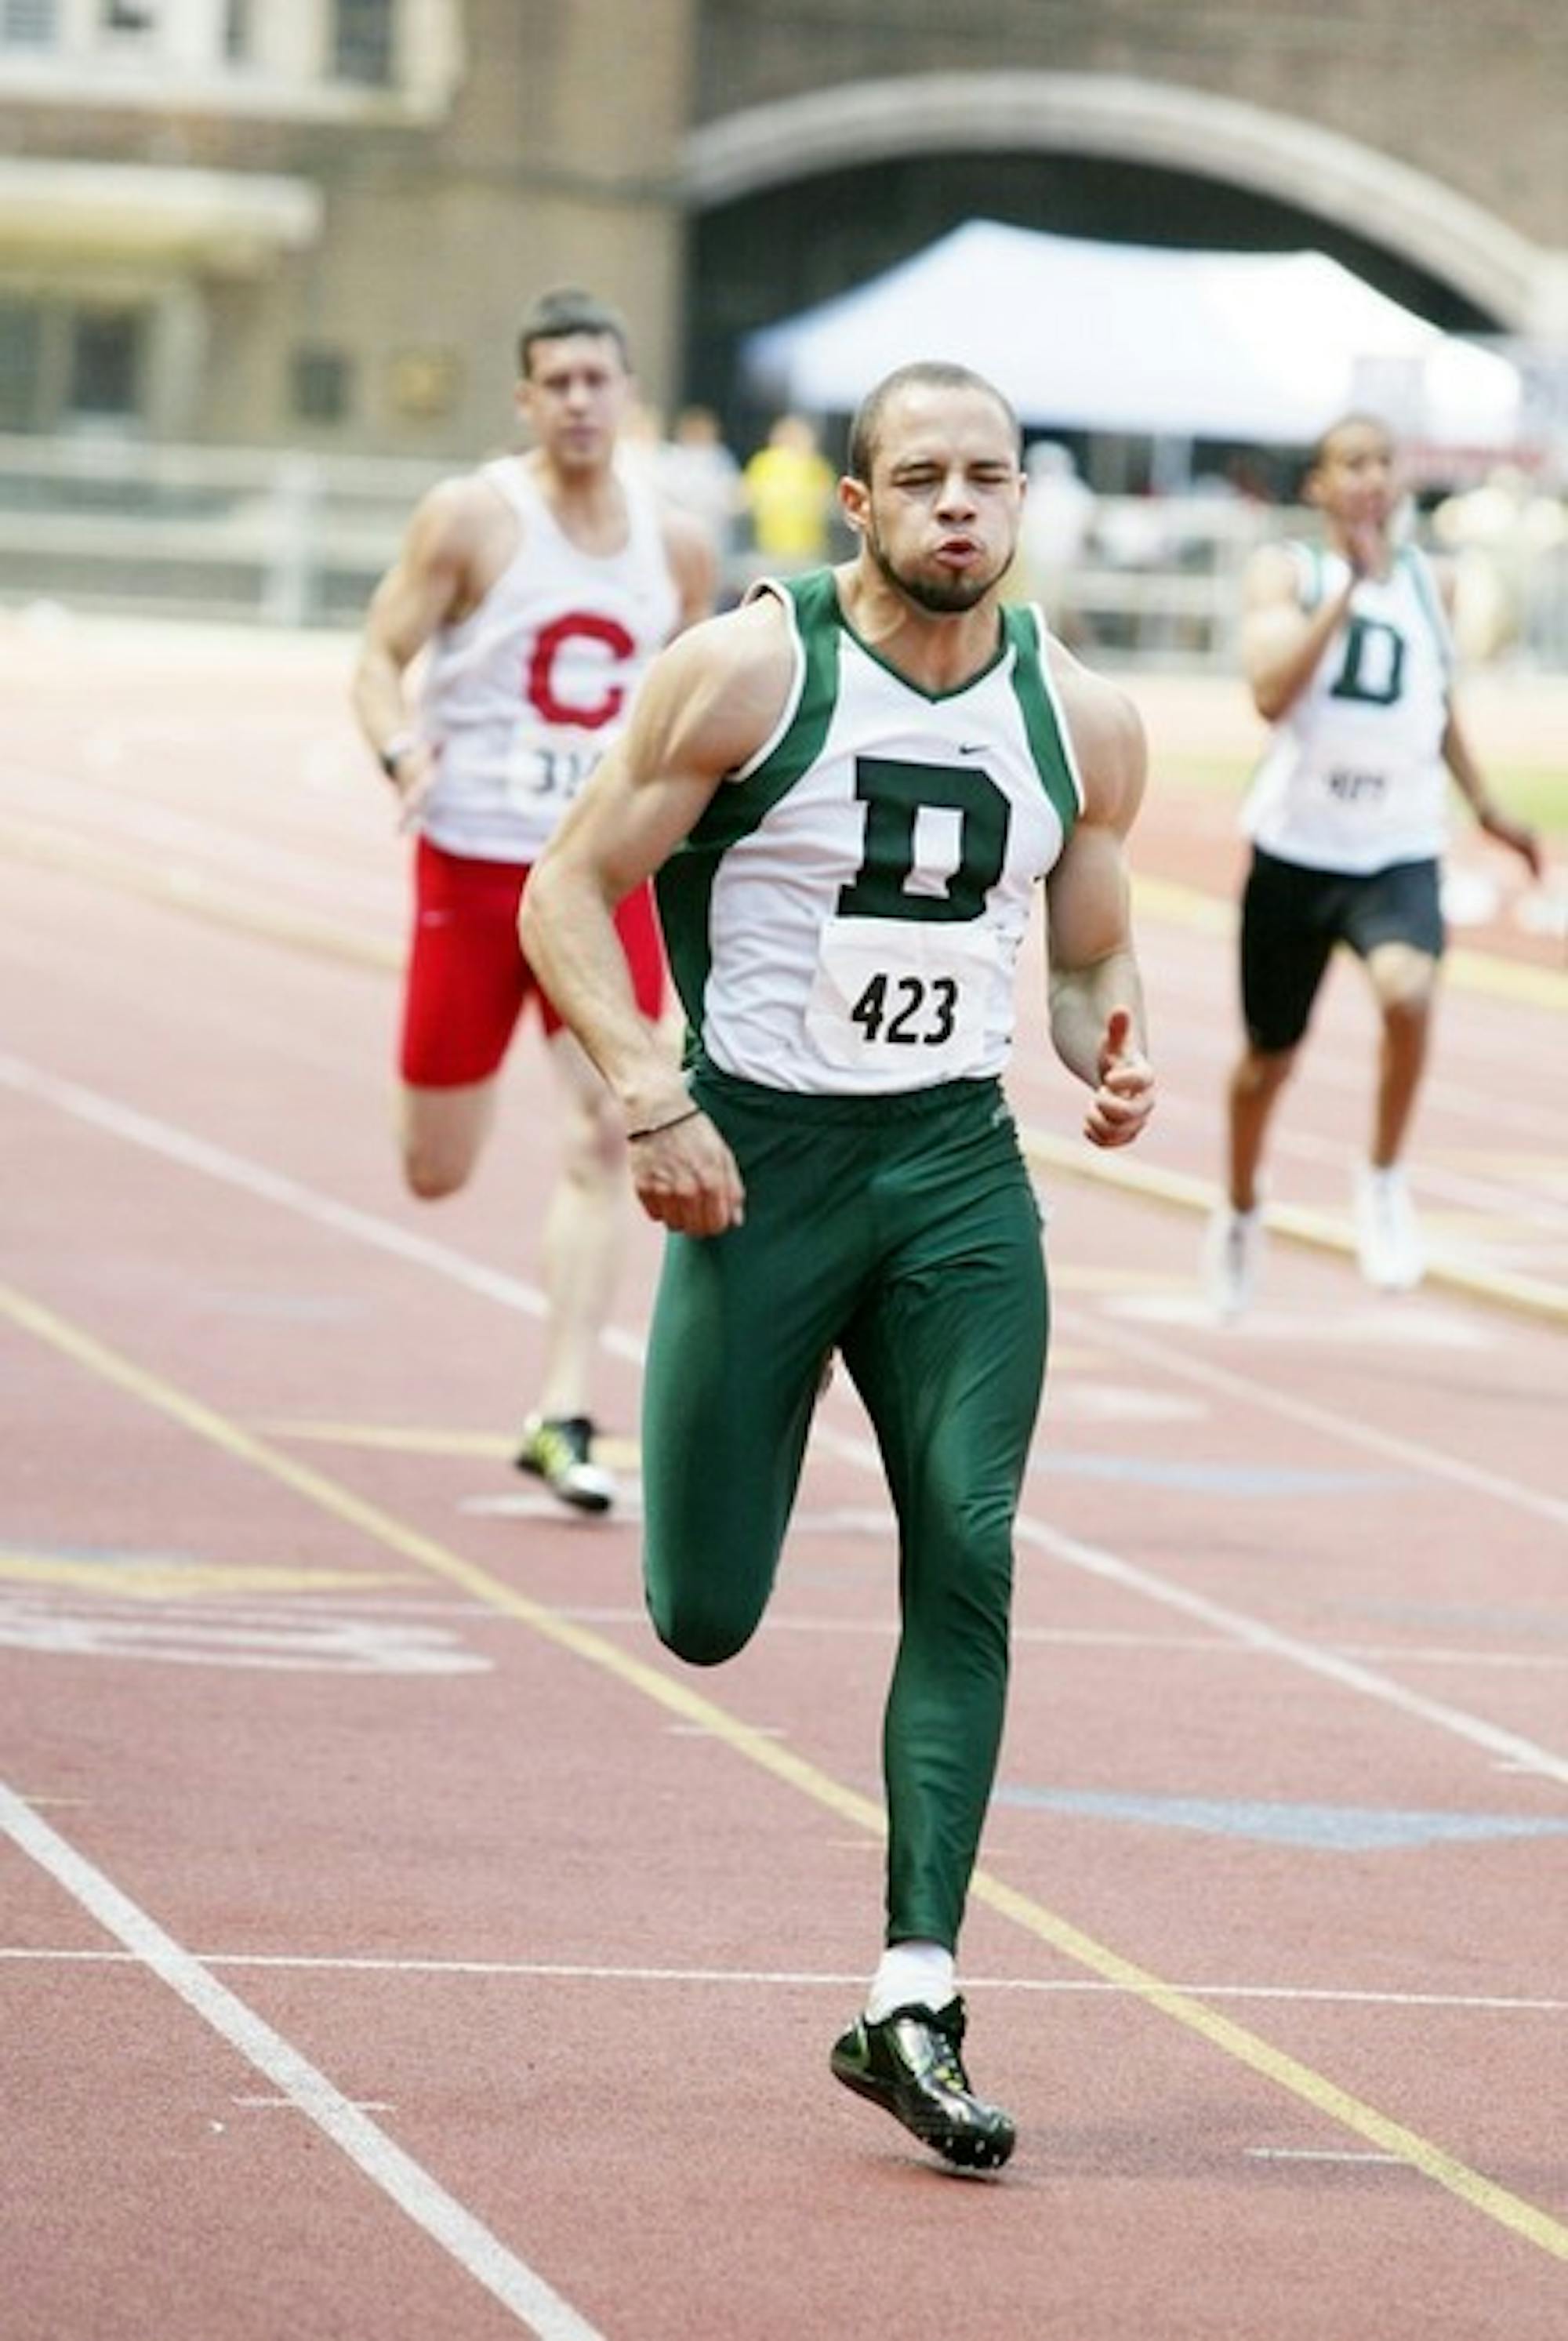 Fatih Stanley '06 storms past his competitors at the Heptagonal Championships, setting new school records in both the 100- and 200-meter dashes.